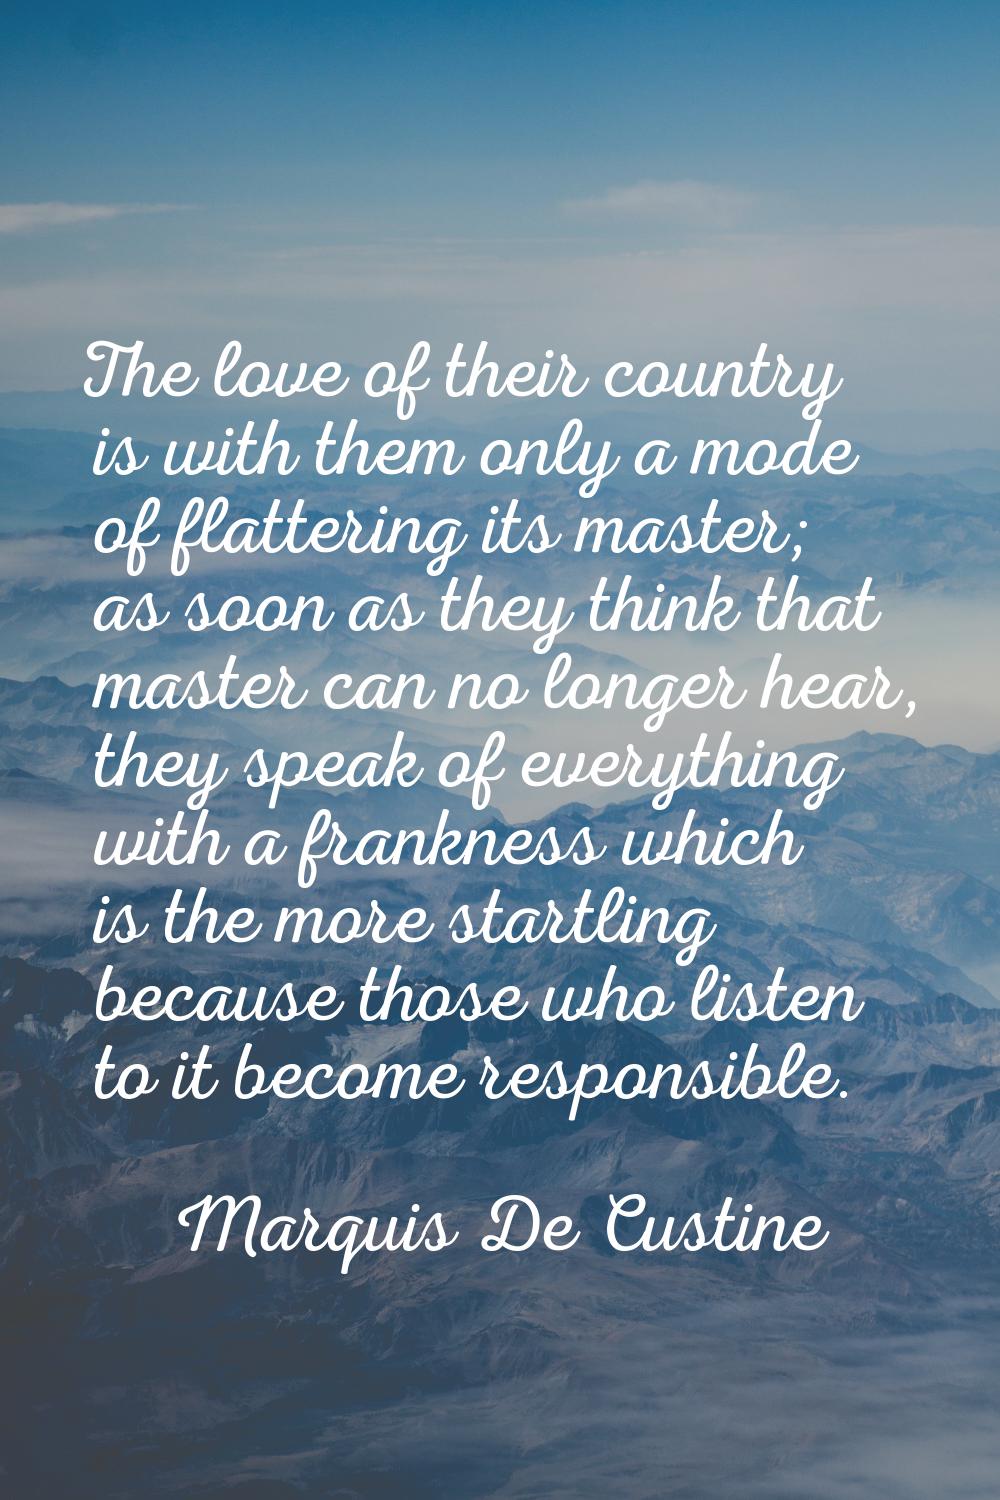 The love of their country is with them only a mode of flattering its master; as soon as they think 